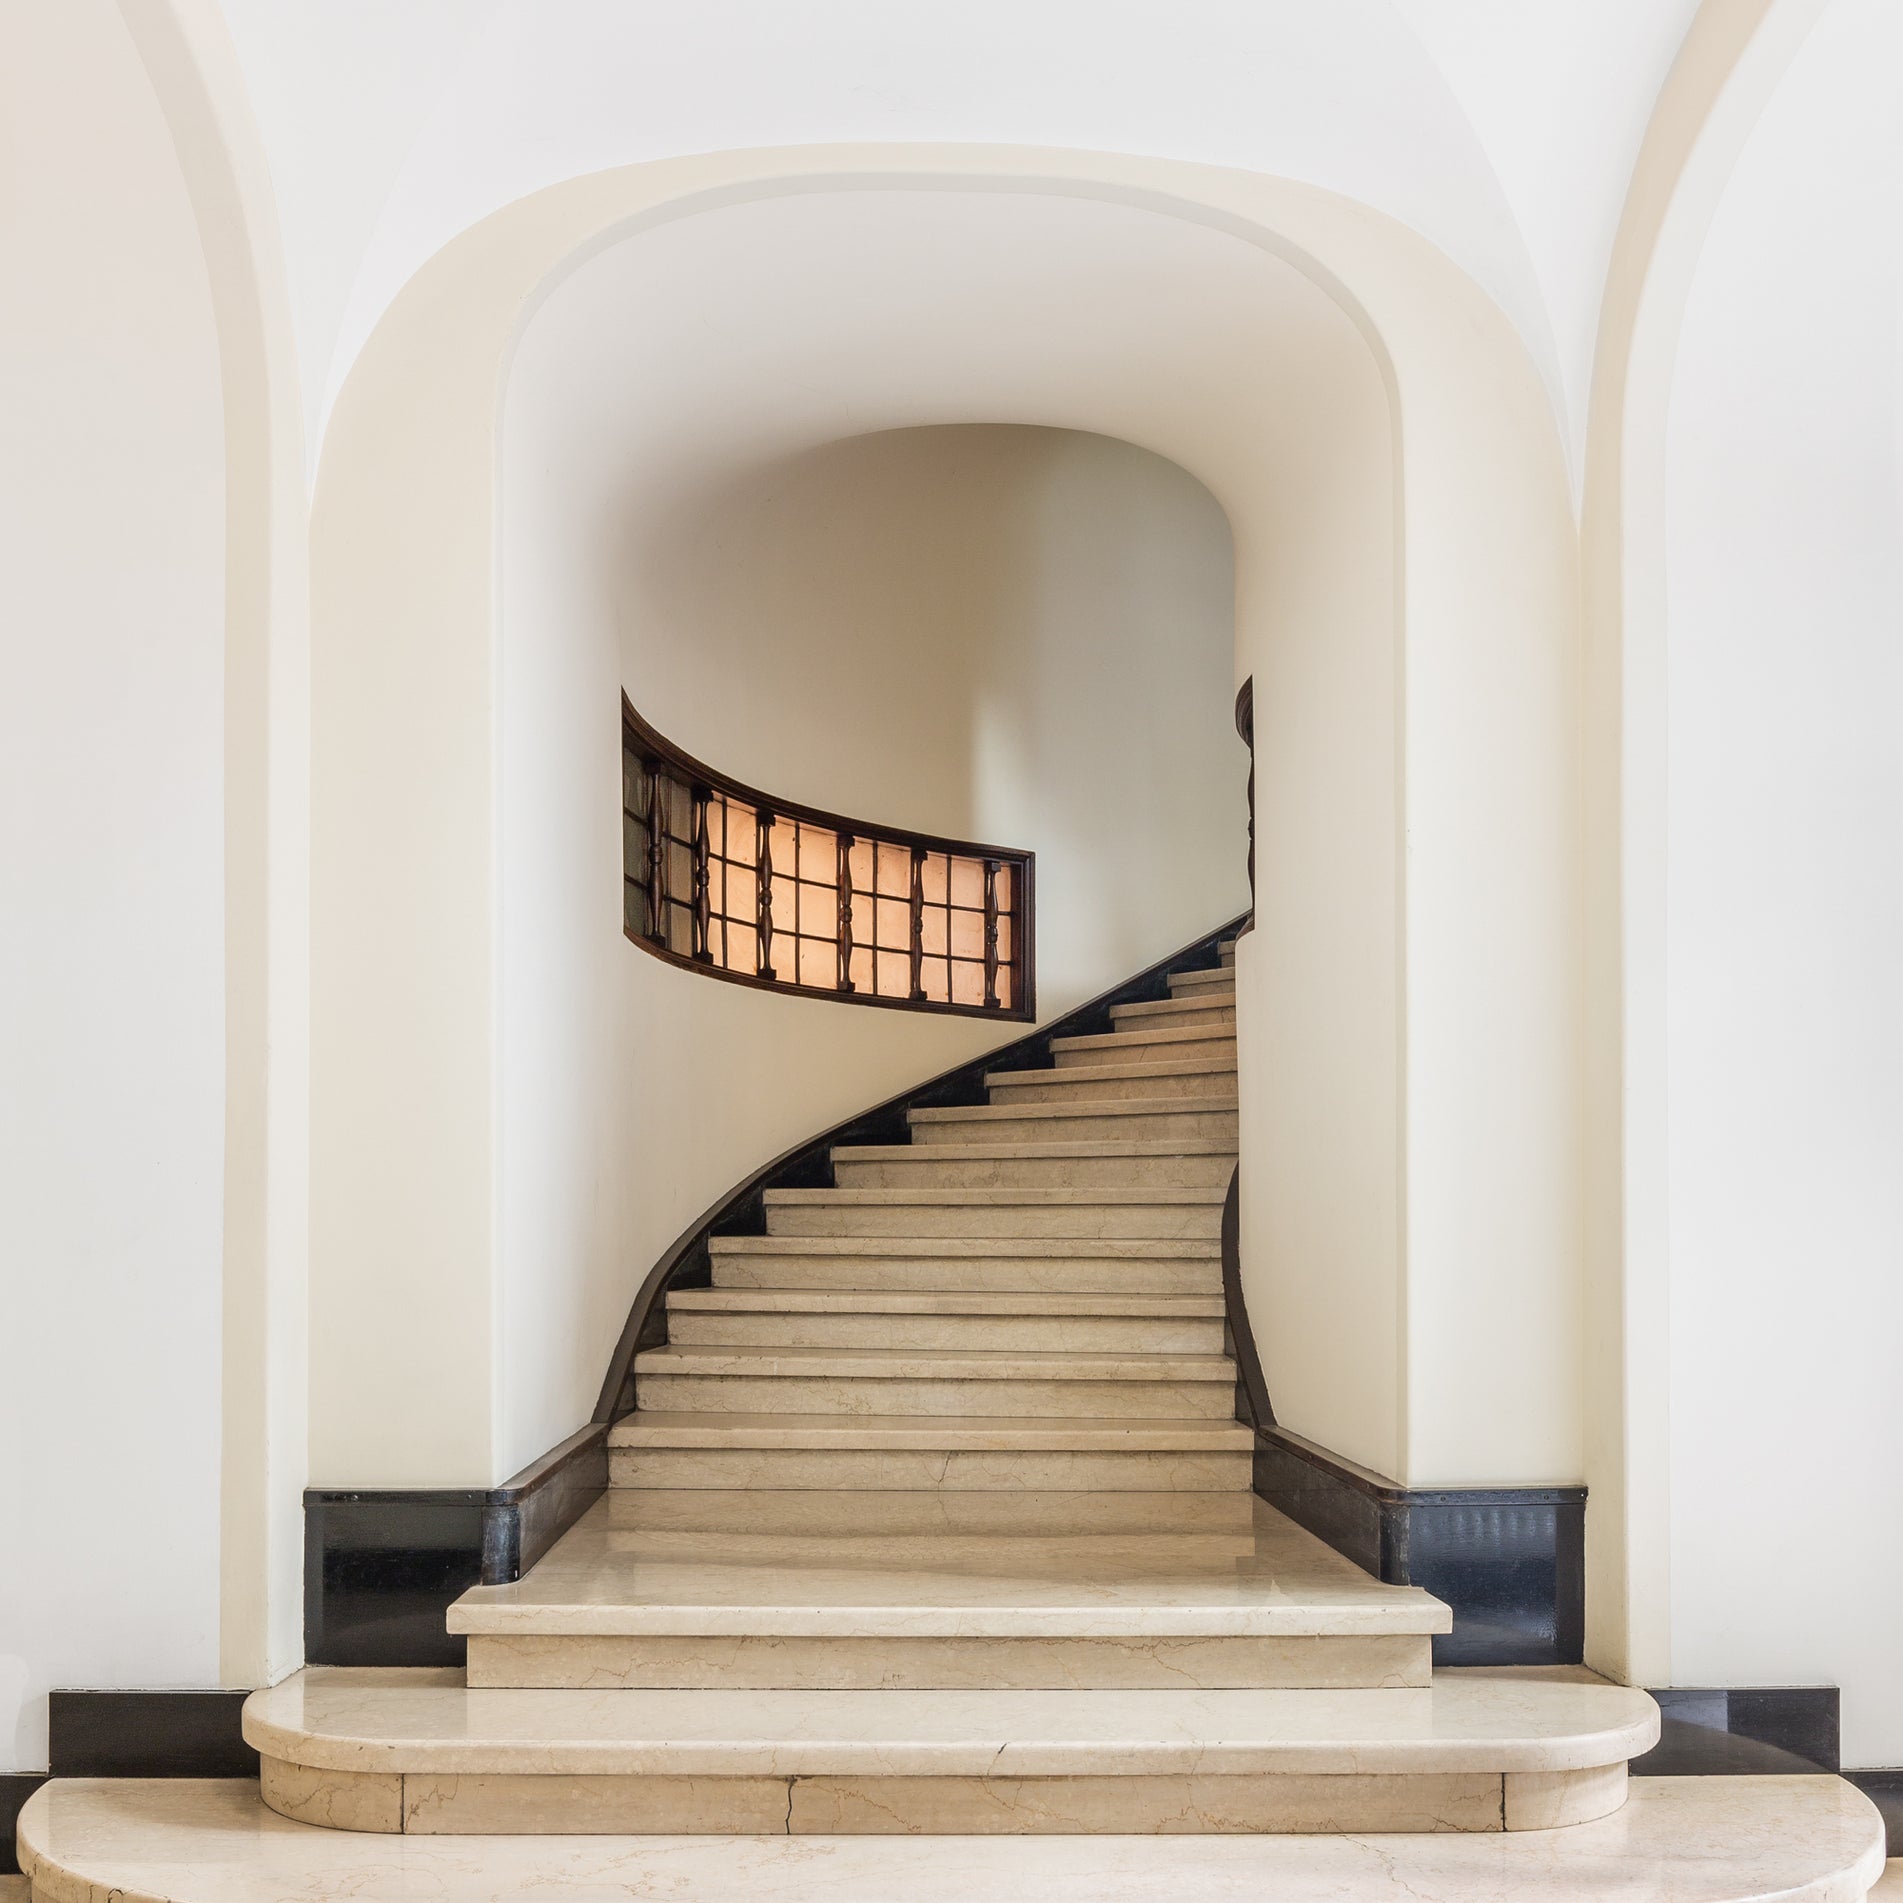 Image of stairwell used as inspiration by designer jewellery brand pomellato